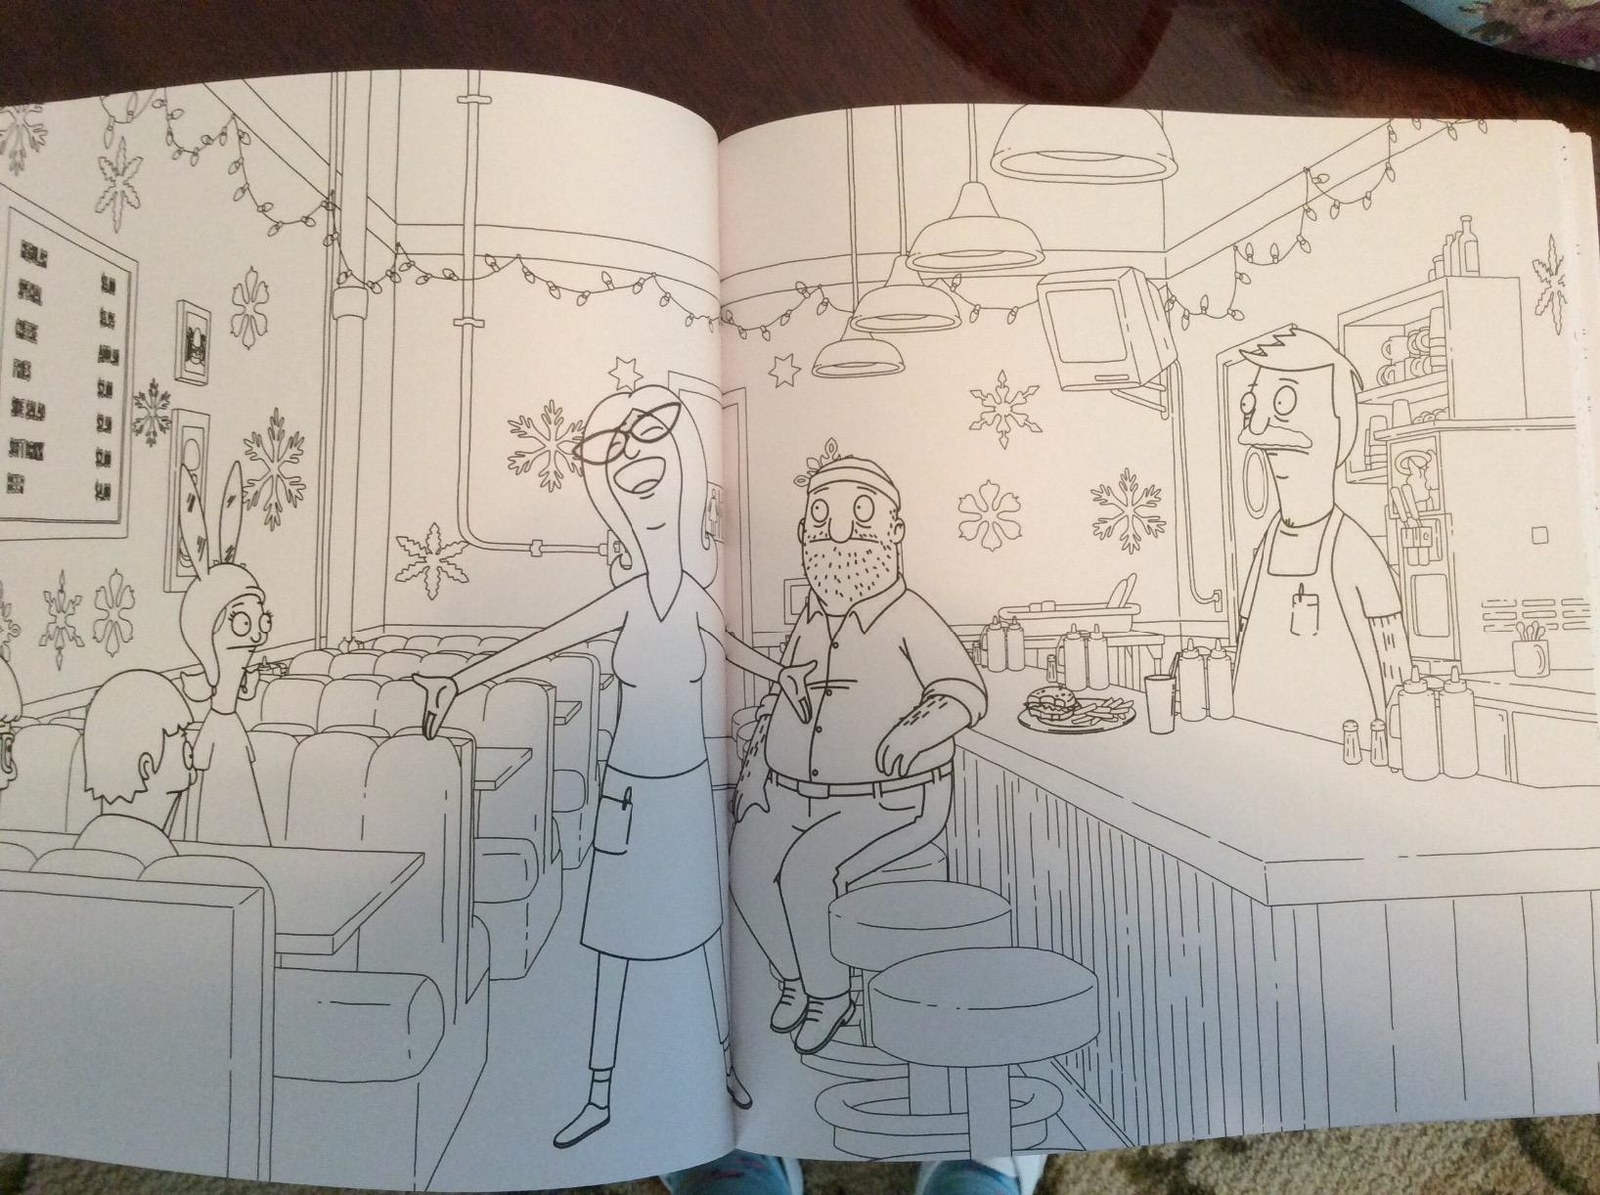 page of the coloring book showing the family&#x27;s restaurant